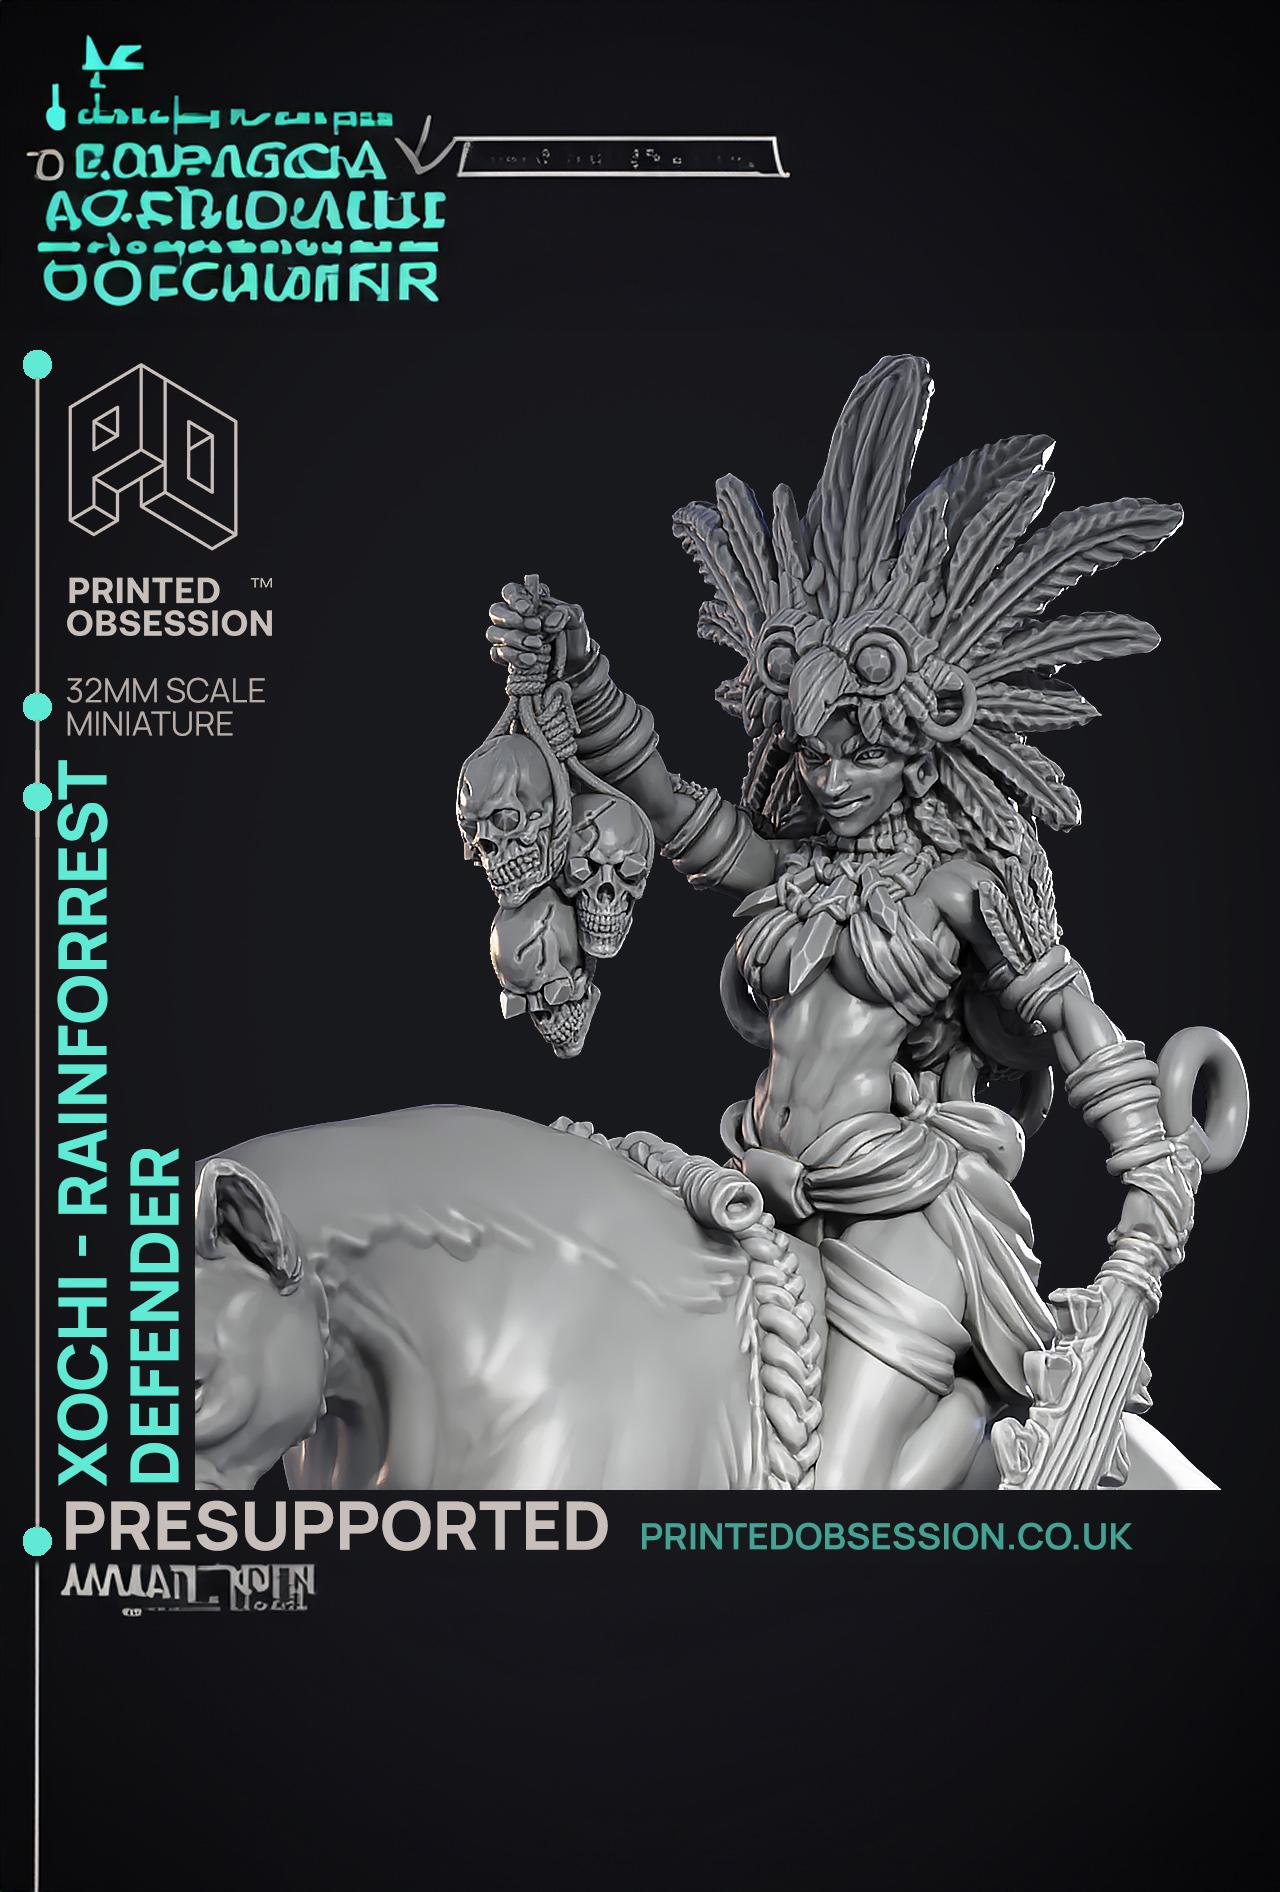 Xochi - Druid of the Amazon -  PRESUPPORTED - Illustrated and Stats - 32mm scale 3d model